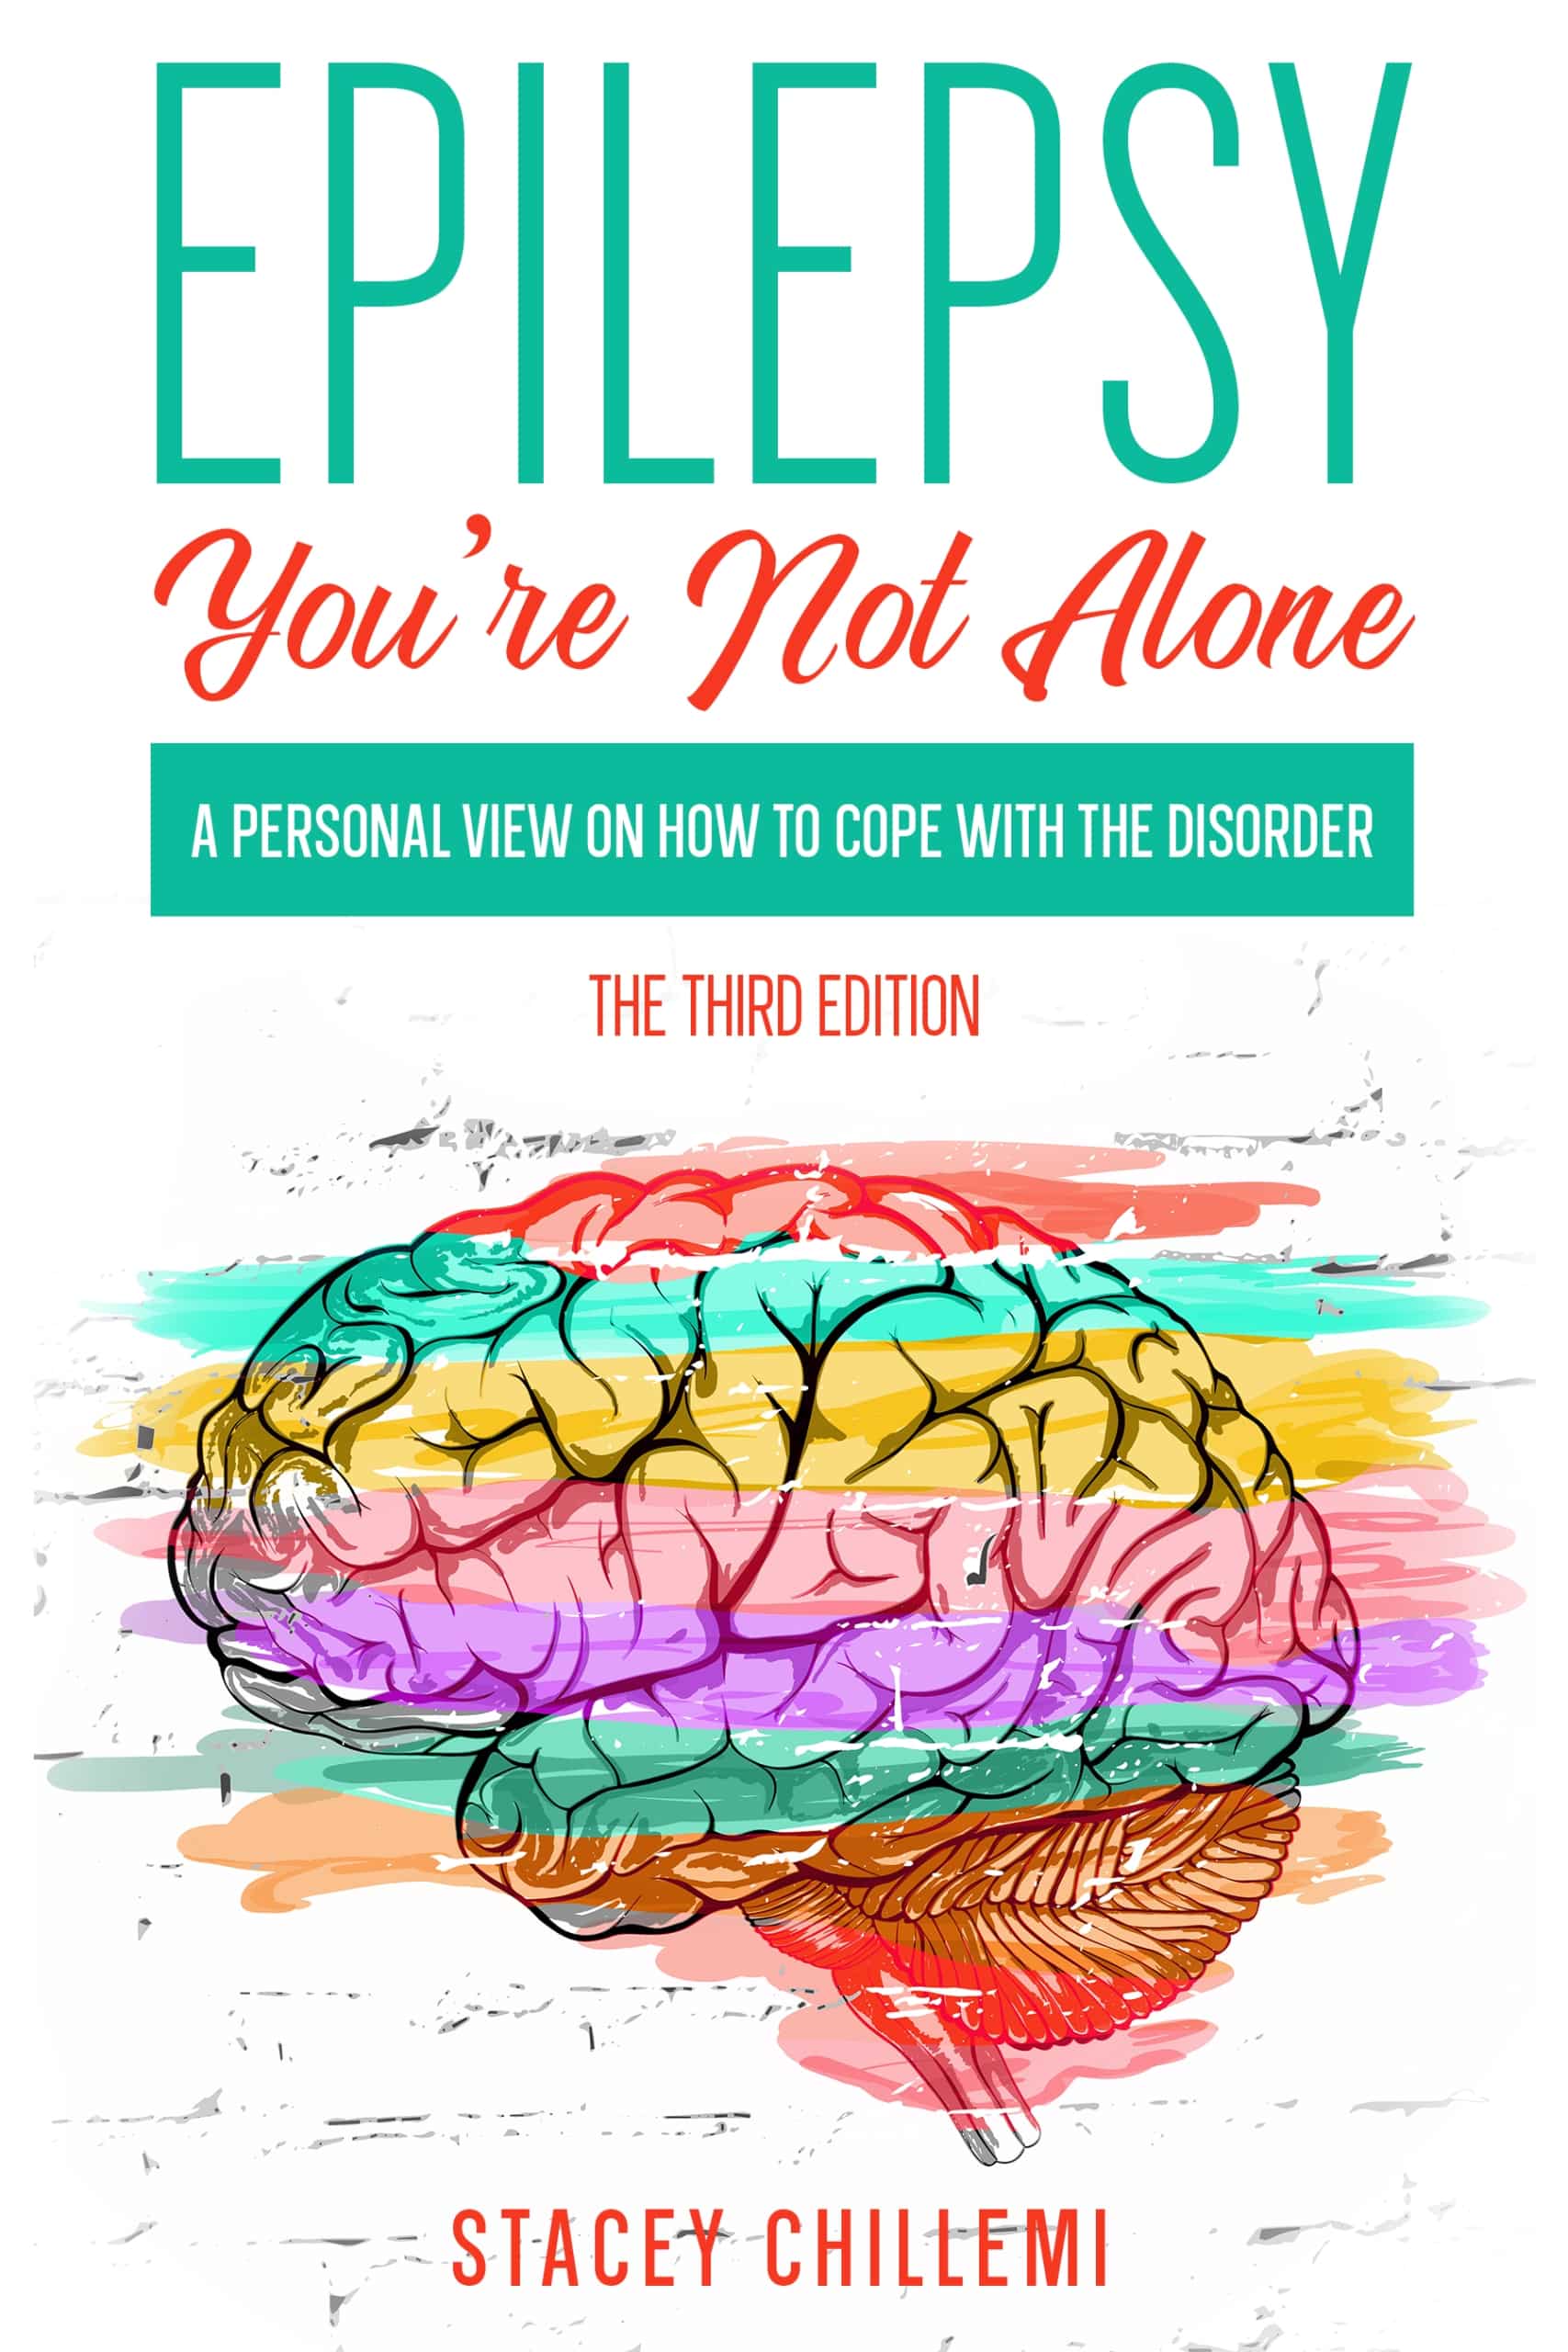 EPILEPSY YOU’RE ALONE A personal approach to how to cope with the disorder.